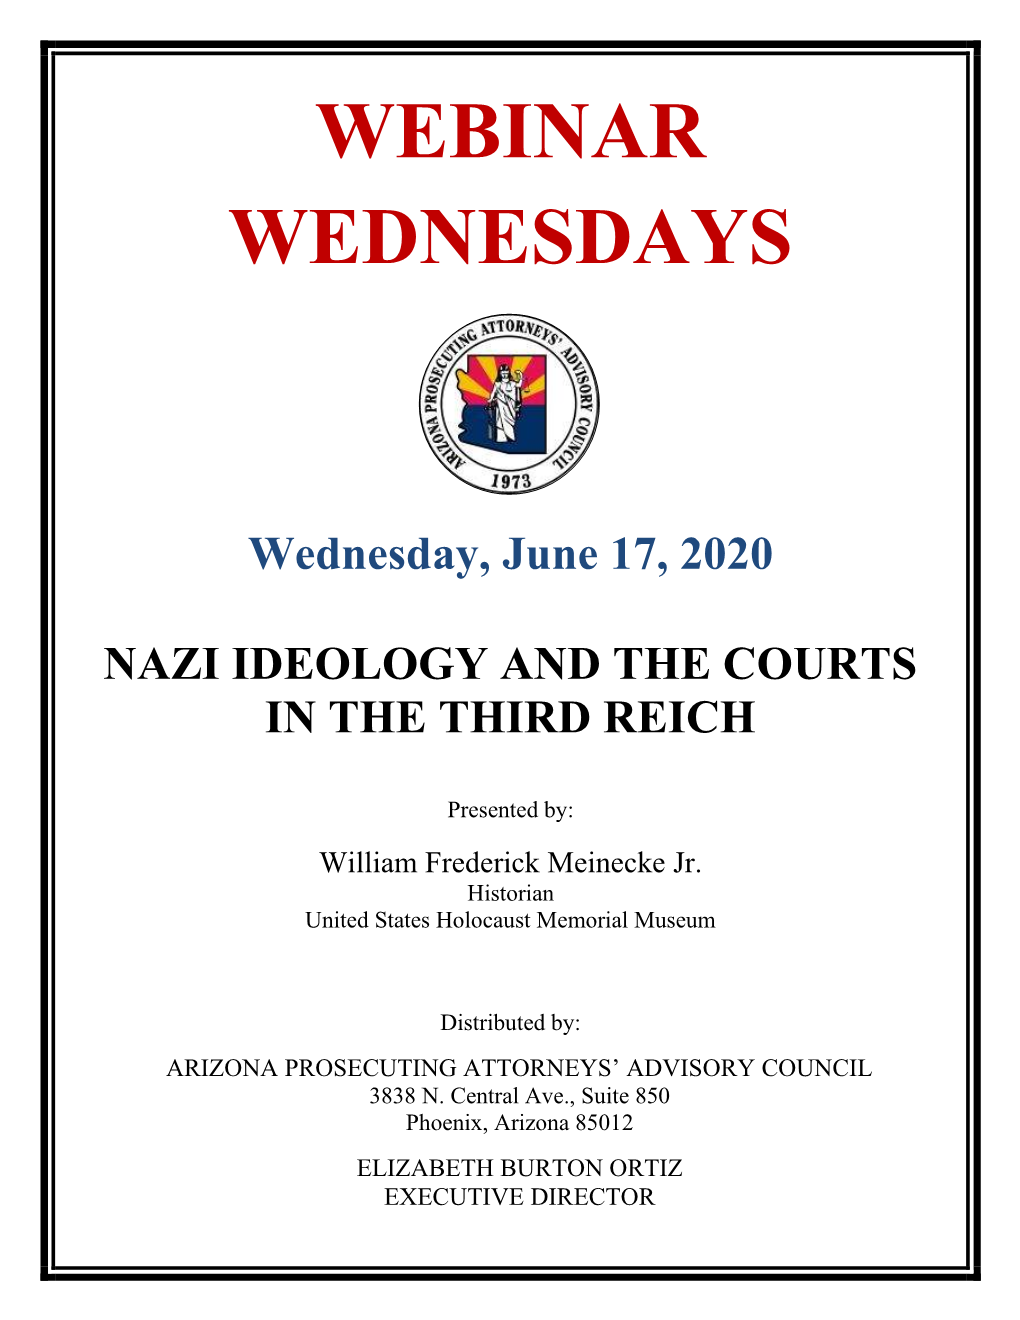 Nazi Ideology and the Courts in the Third Reich